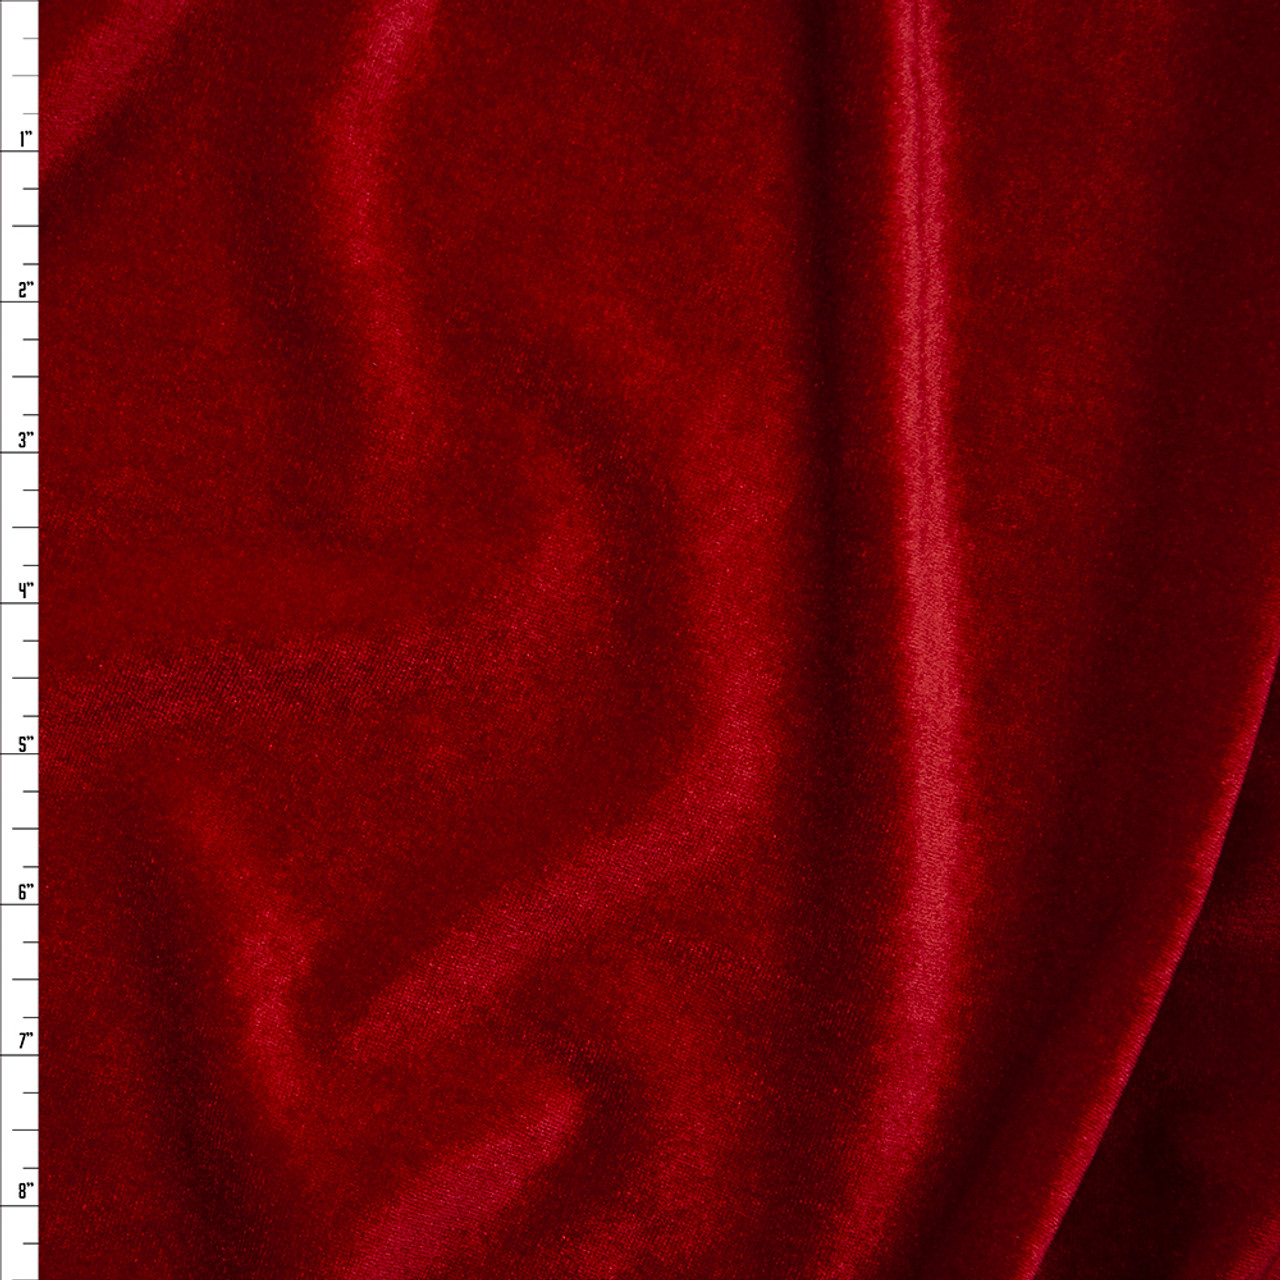 58-60 Red Stretch Velvet Fabric 12 Yards (420gms/yd) Wholesale by The Bolt